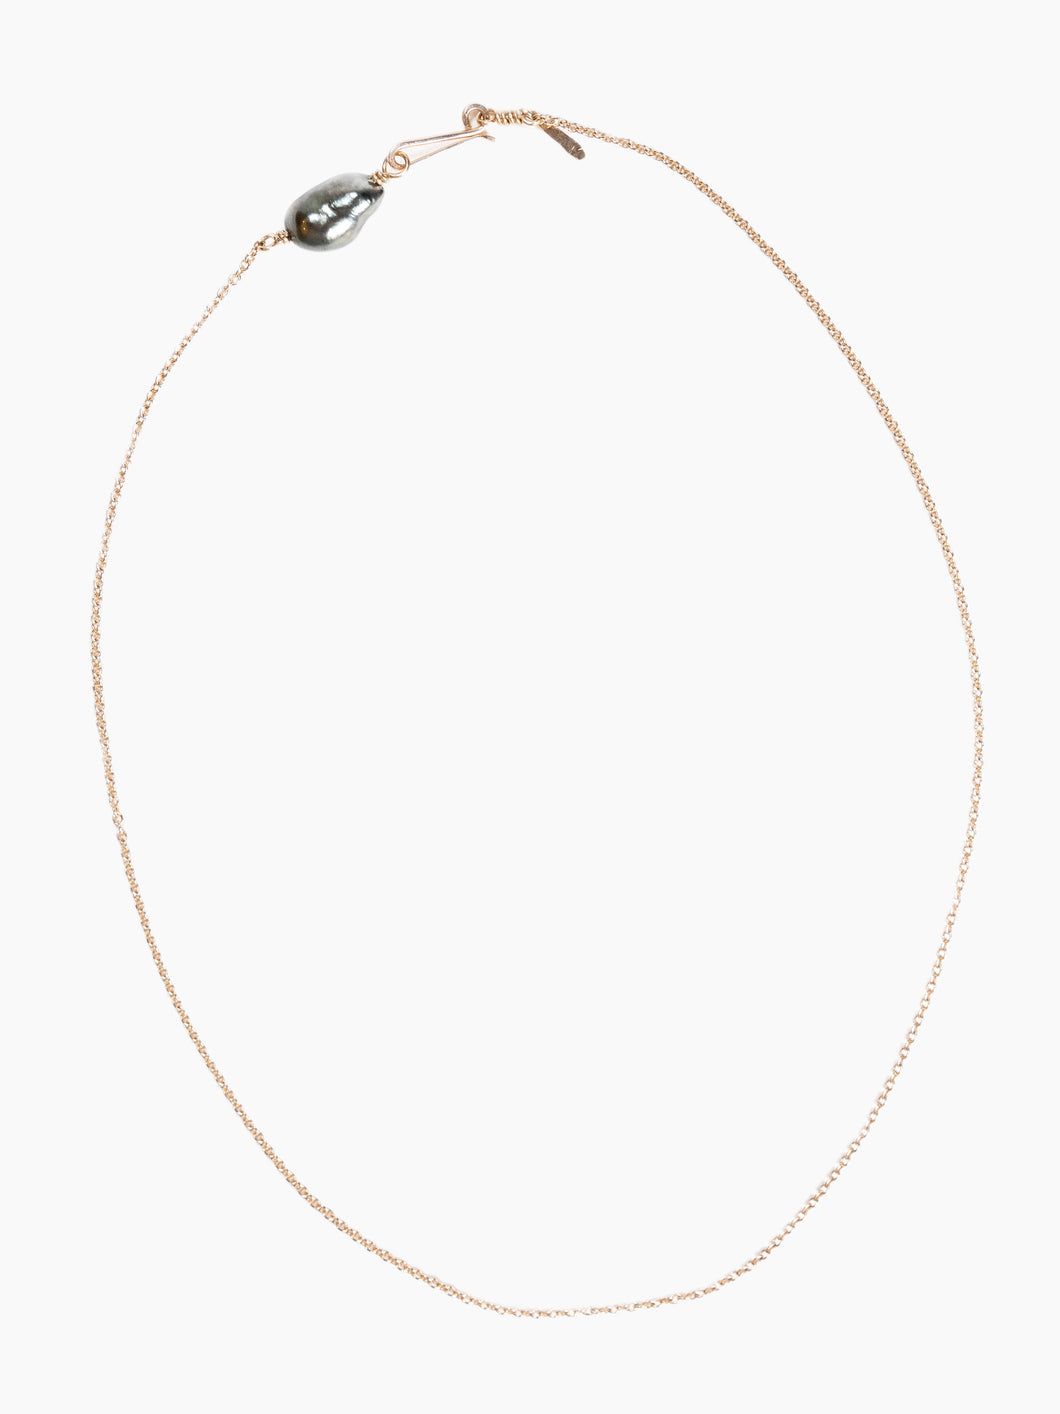 14K Keshi Pearl Chain Necklace, 16